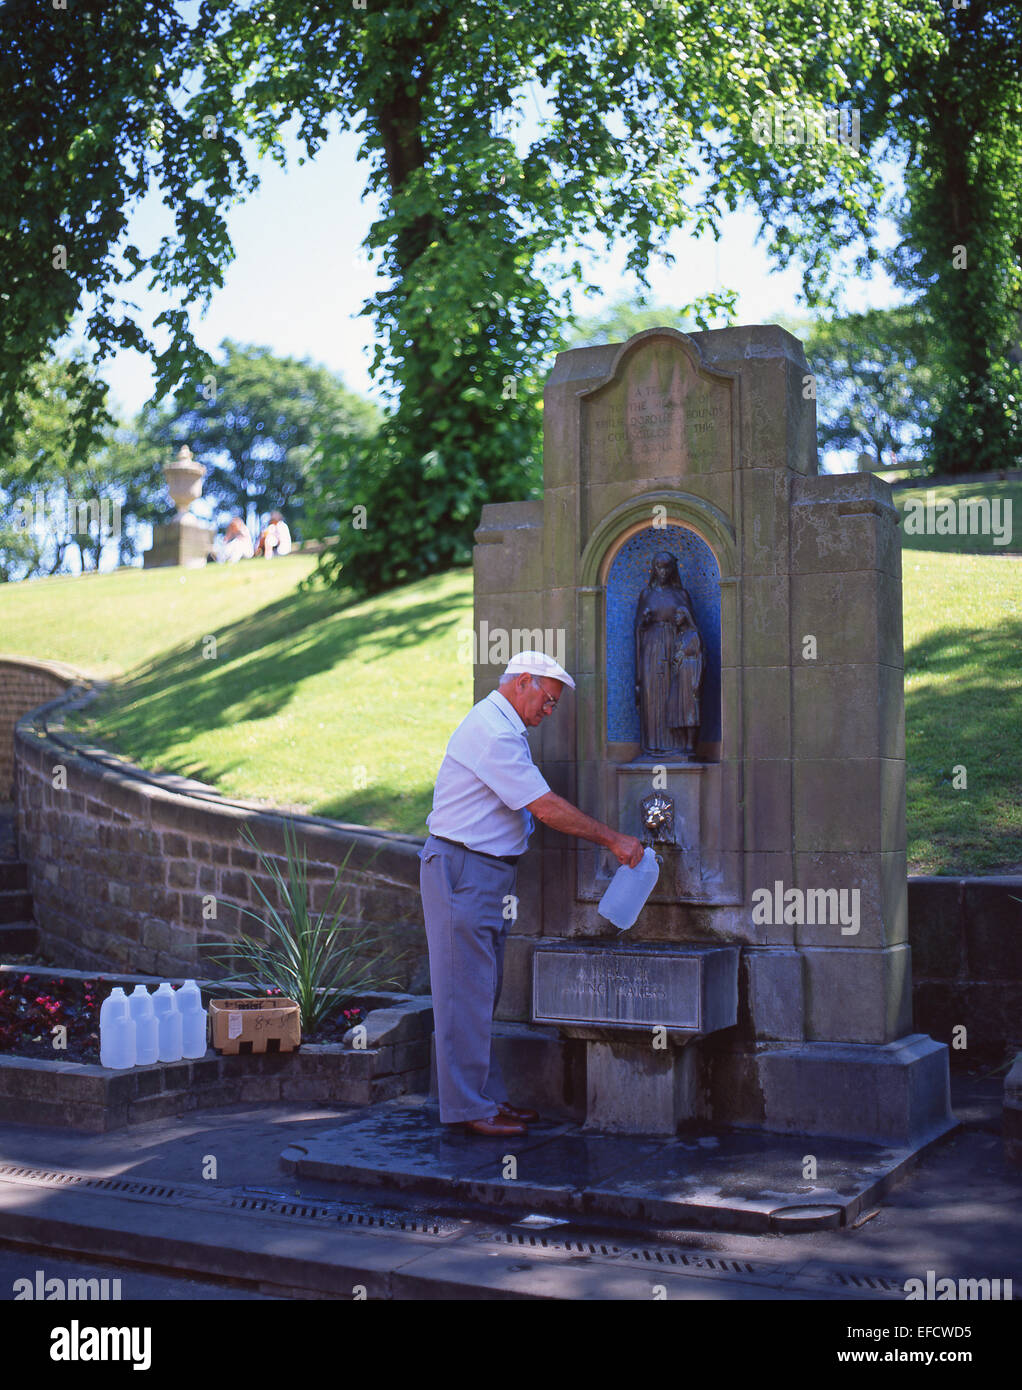 Man filling up bottles with water at St Ann's Well, Buxton, Derbyshire, England, United Kingdom Stock Photo